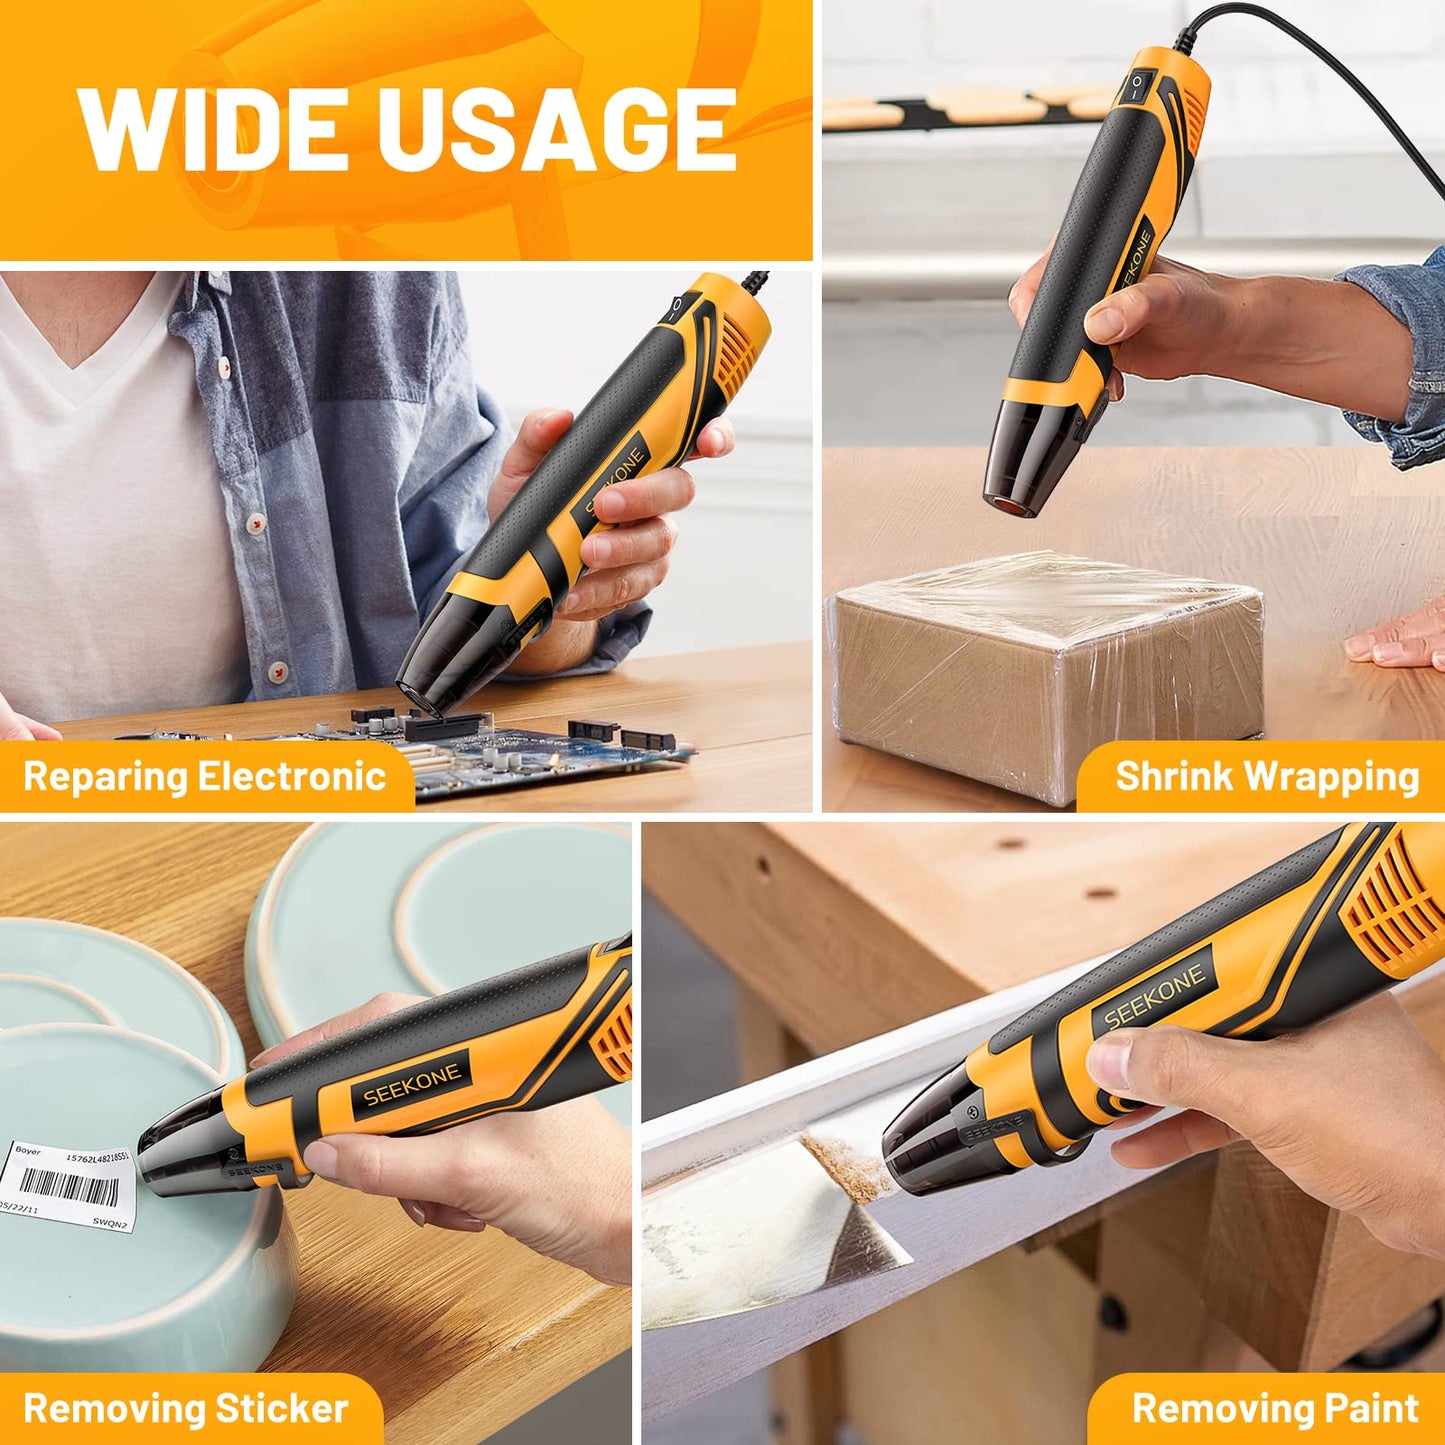 SEEKONE Mini Heat Gun, 350W 662℉ (350℃) Fast Heat Handheld Hot Air Gun Tool with Reflector Nozzle and 4.9Ft Long Cable Overload Protection for Craft Embossing, Shrink Wrapping and Stripping Paint